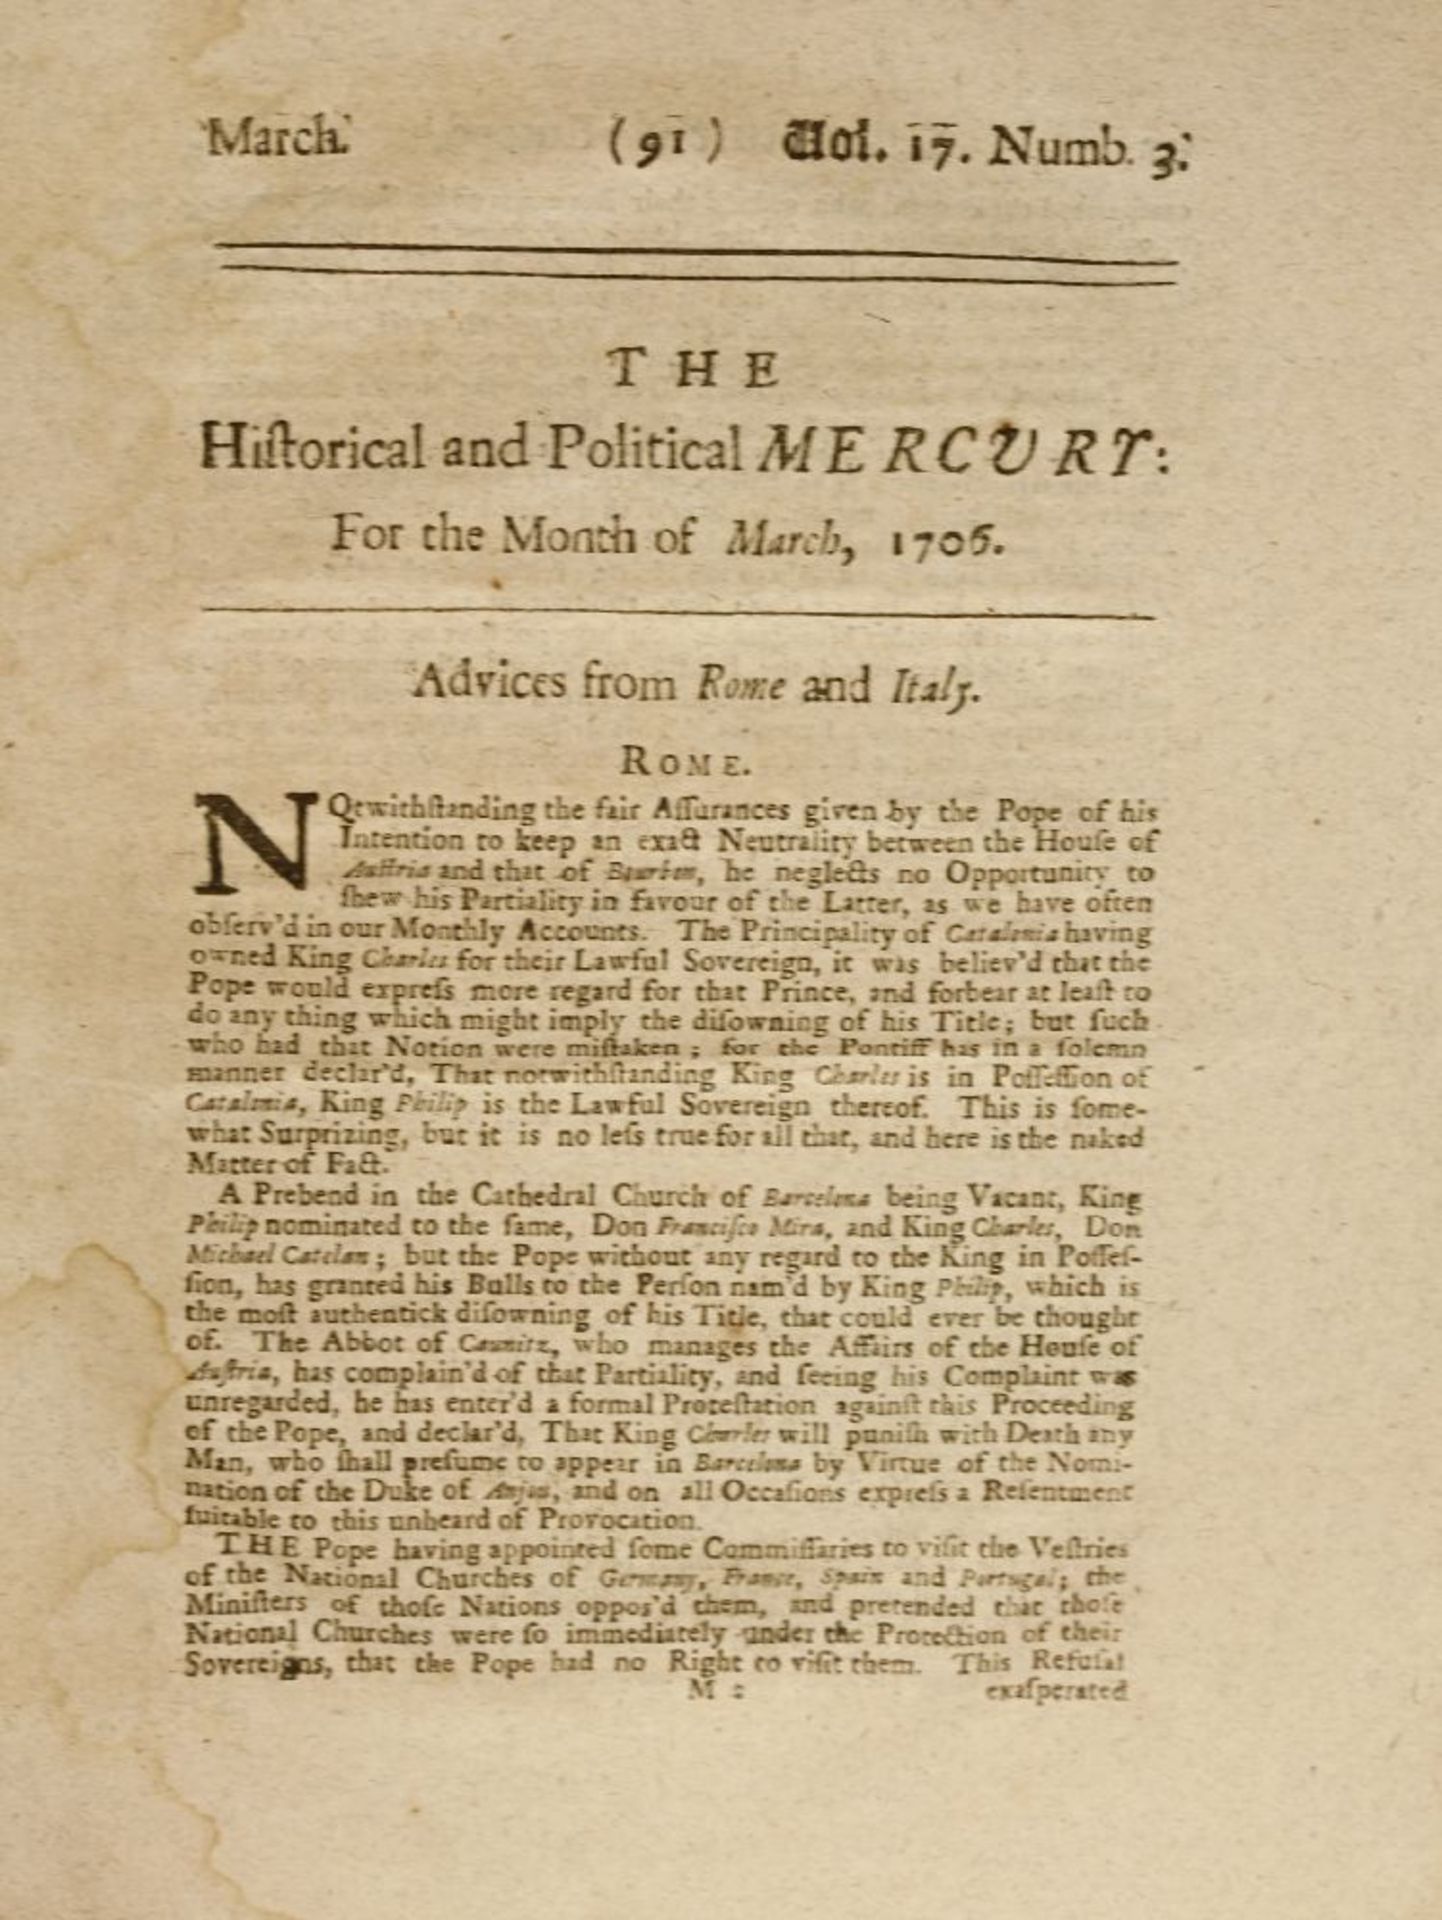 1- Periodical: Monthly Mercury; for the month of March, 1706 (vol. xvii, no. 3). PP: title, (i) - Image 3 of 3